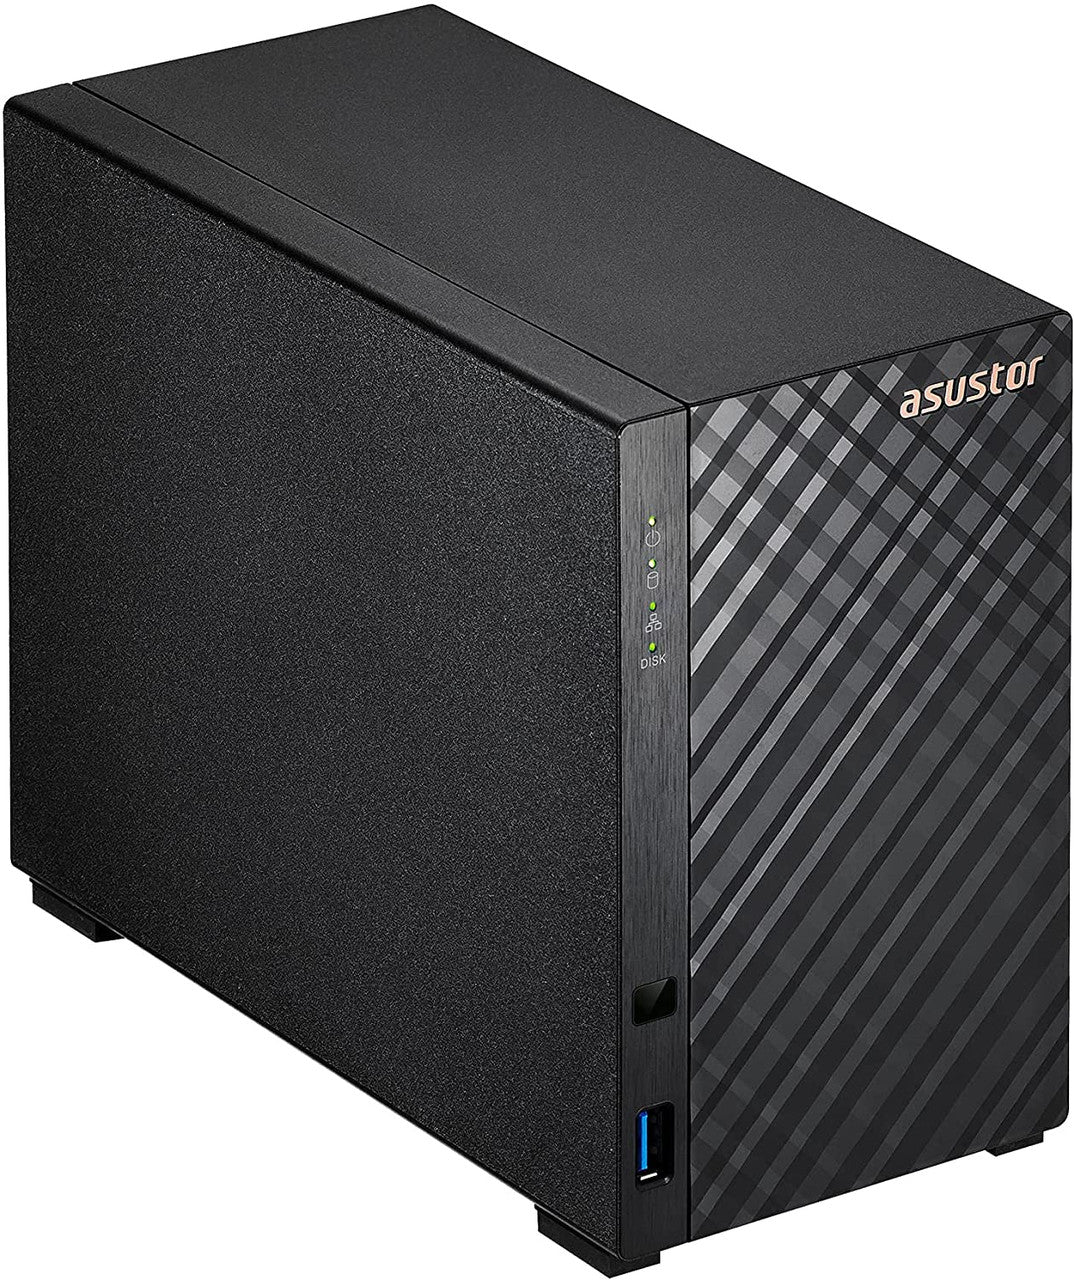 Asustor AS1102T 2-Bay Drivestor 2 NAS with 1GB RAM and 20TB (2x10TB) Seagate Ironwolf NAS Drives